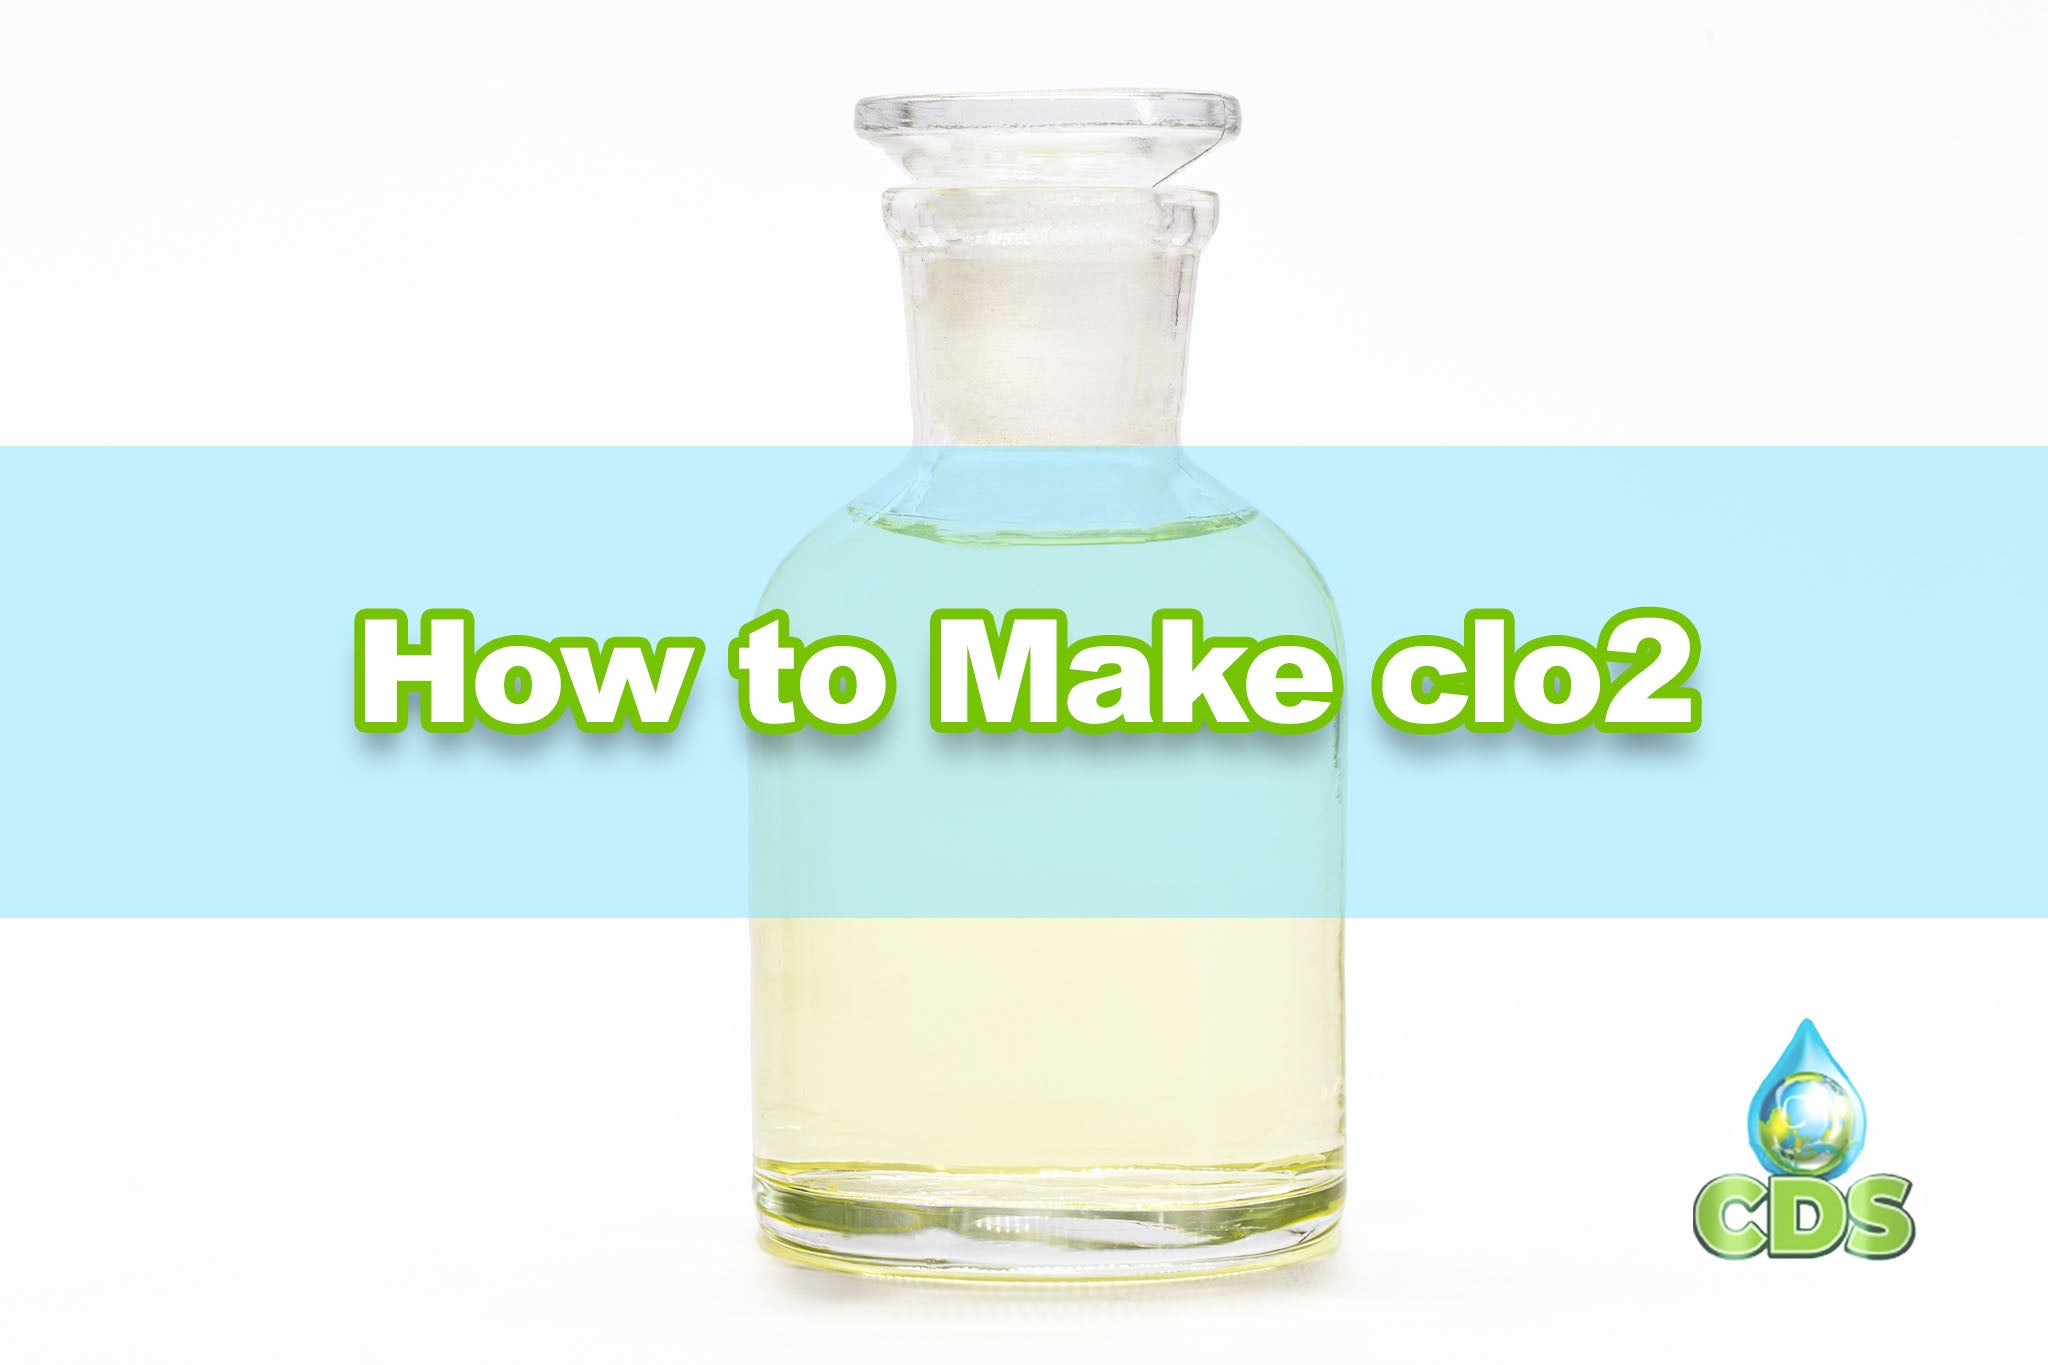 How to make chlorine dioxide - directions